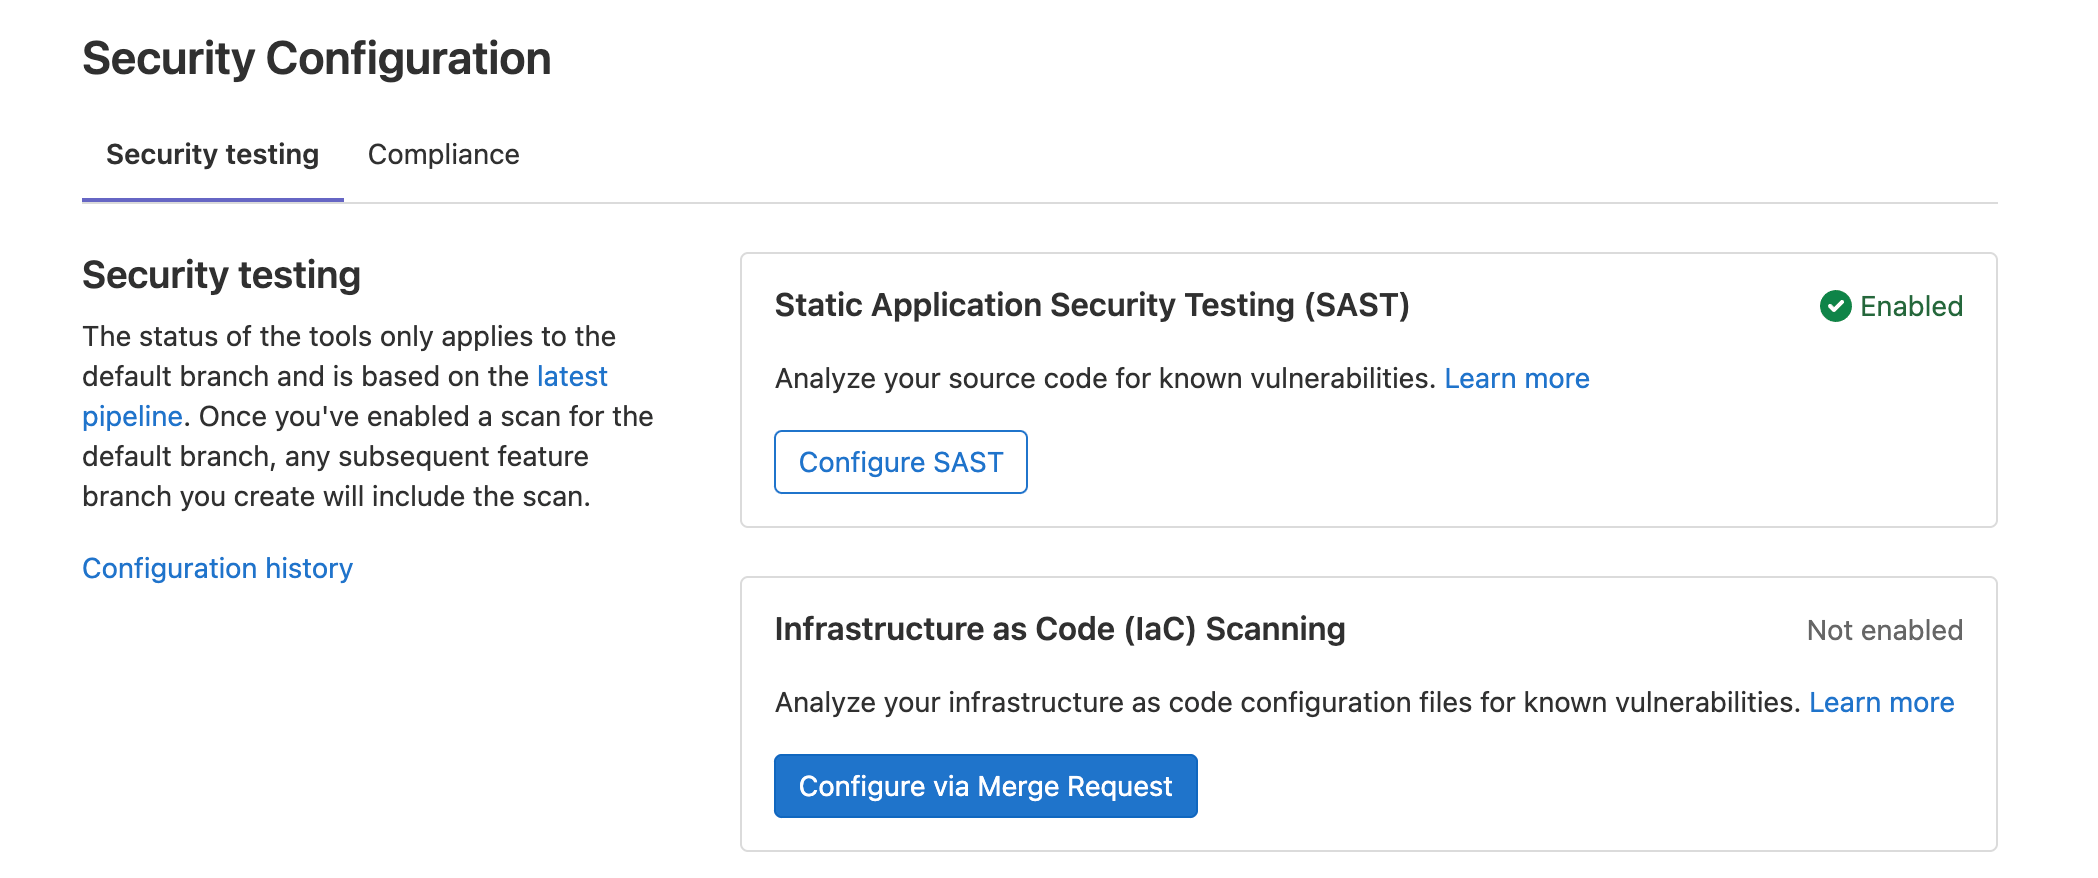 Introducing Infrastructure as Code (IaC) security scanning